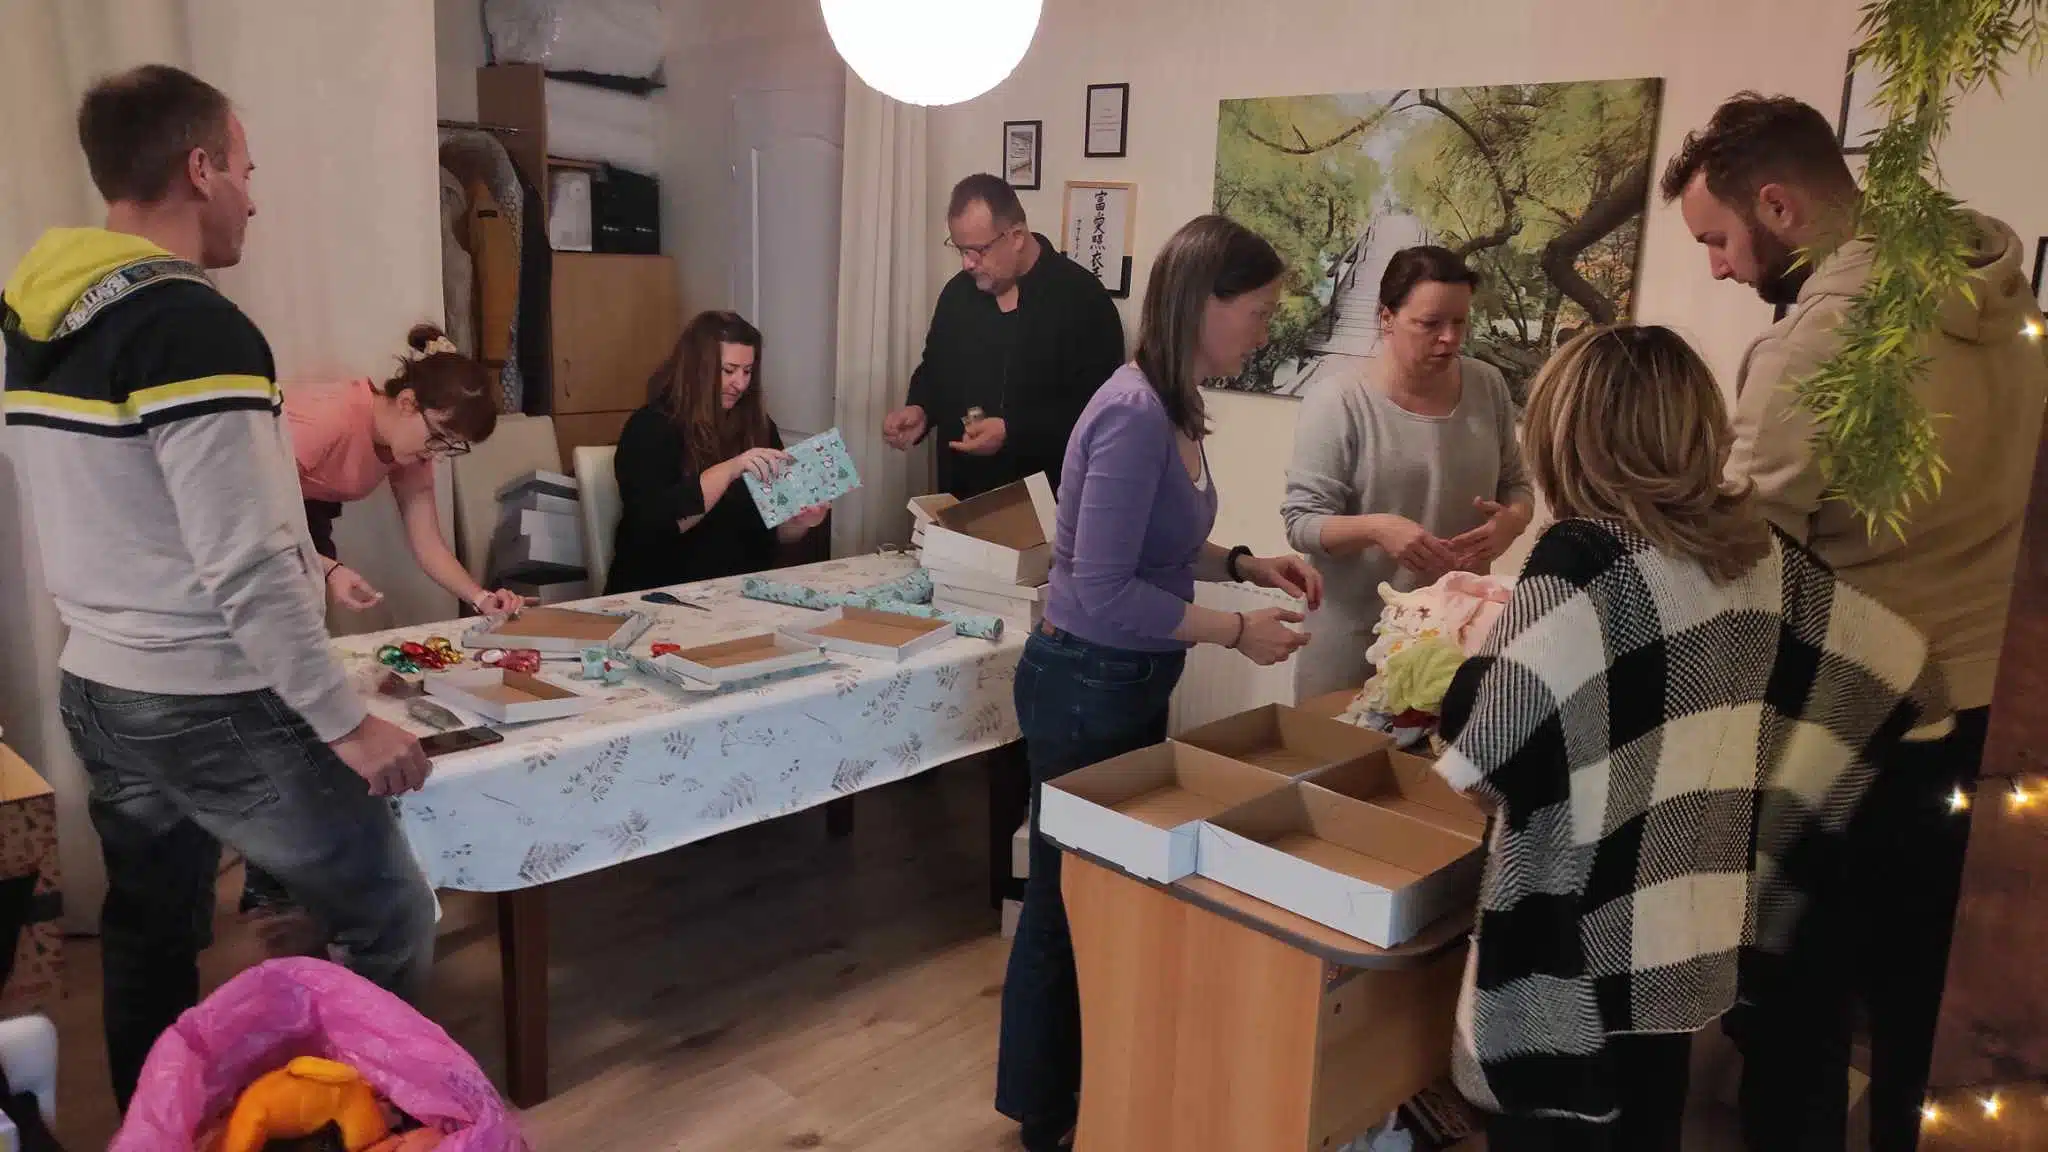 HLI Hungary volunteers putting together Christmas charity boxes